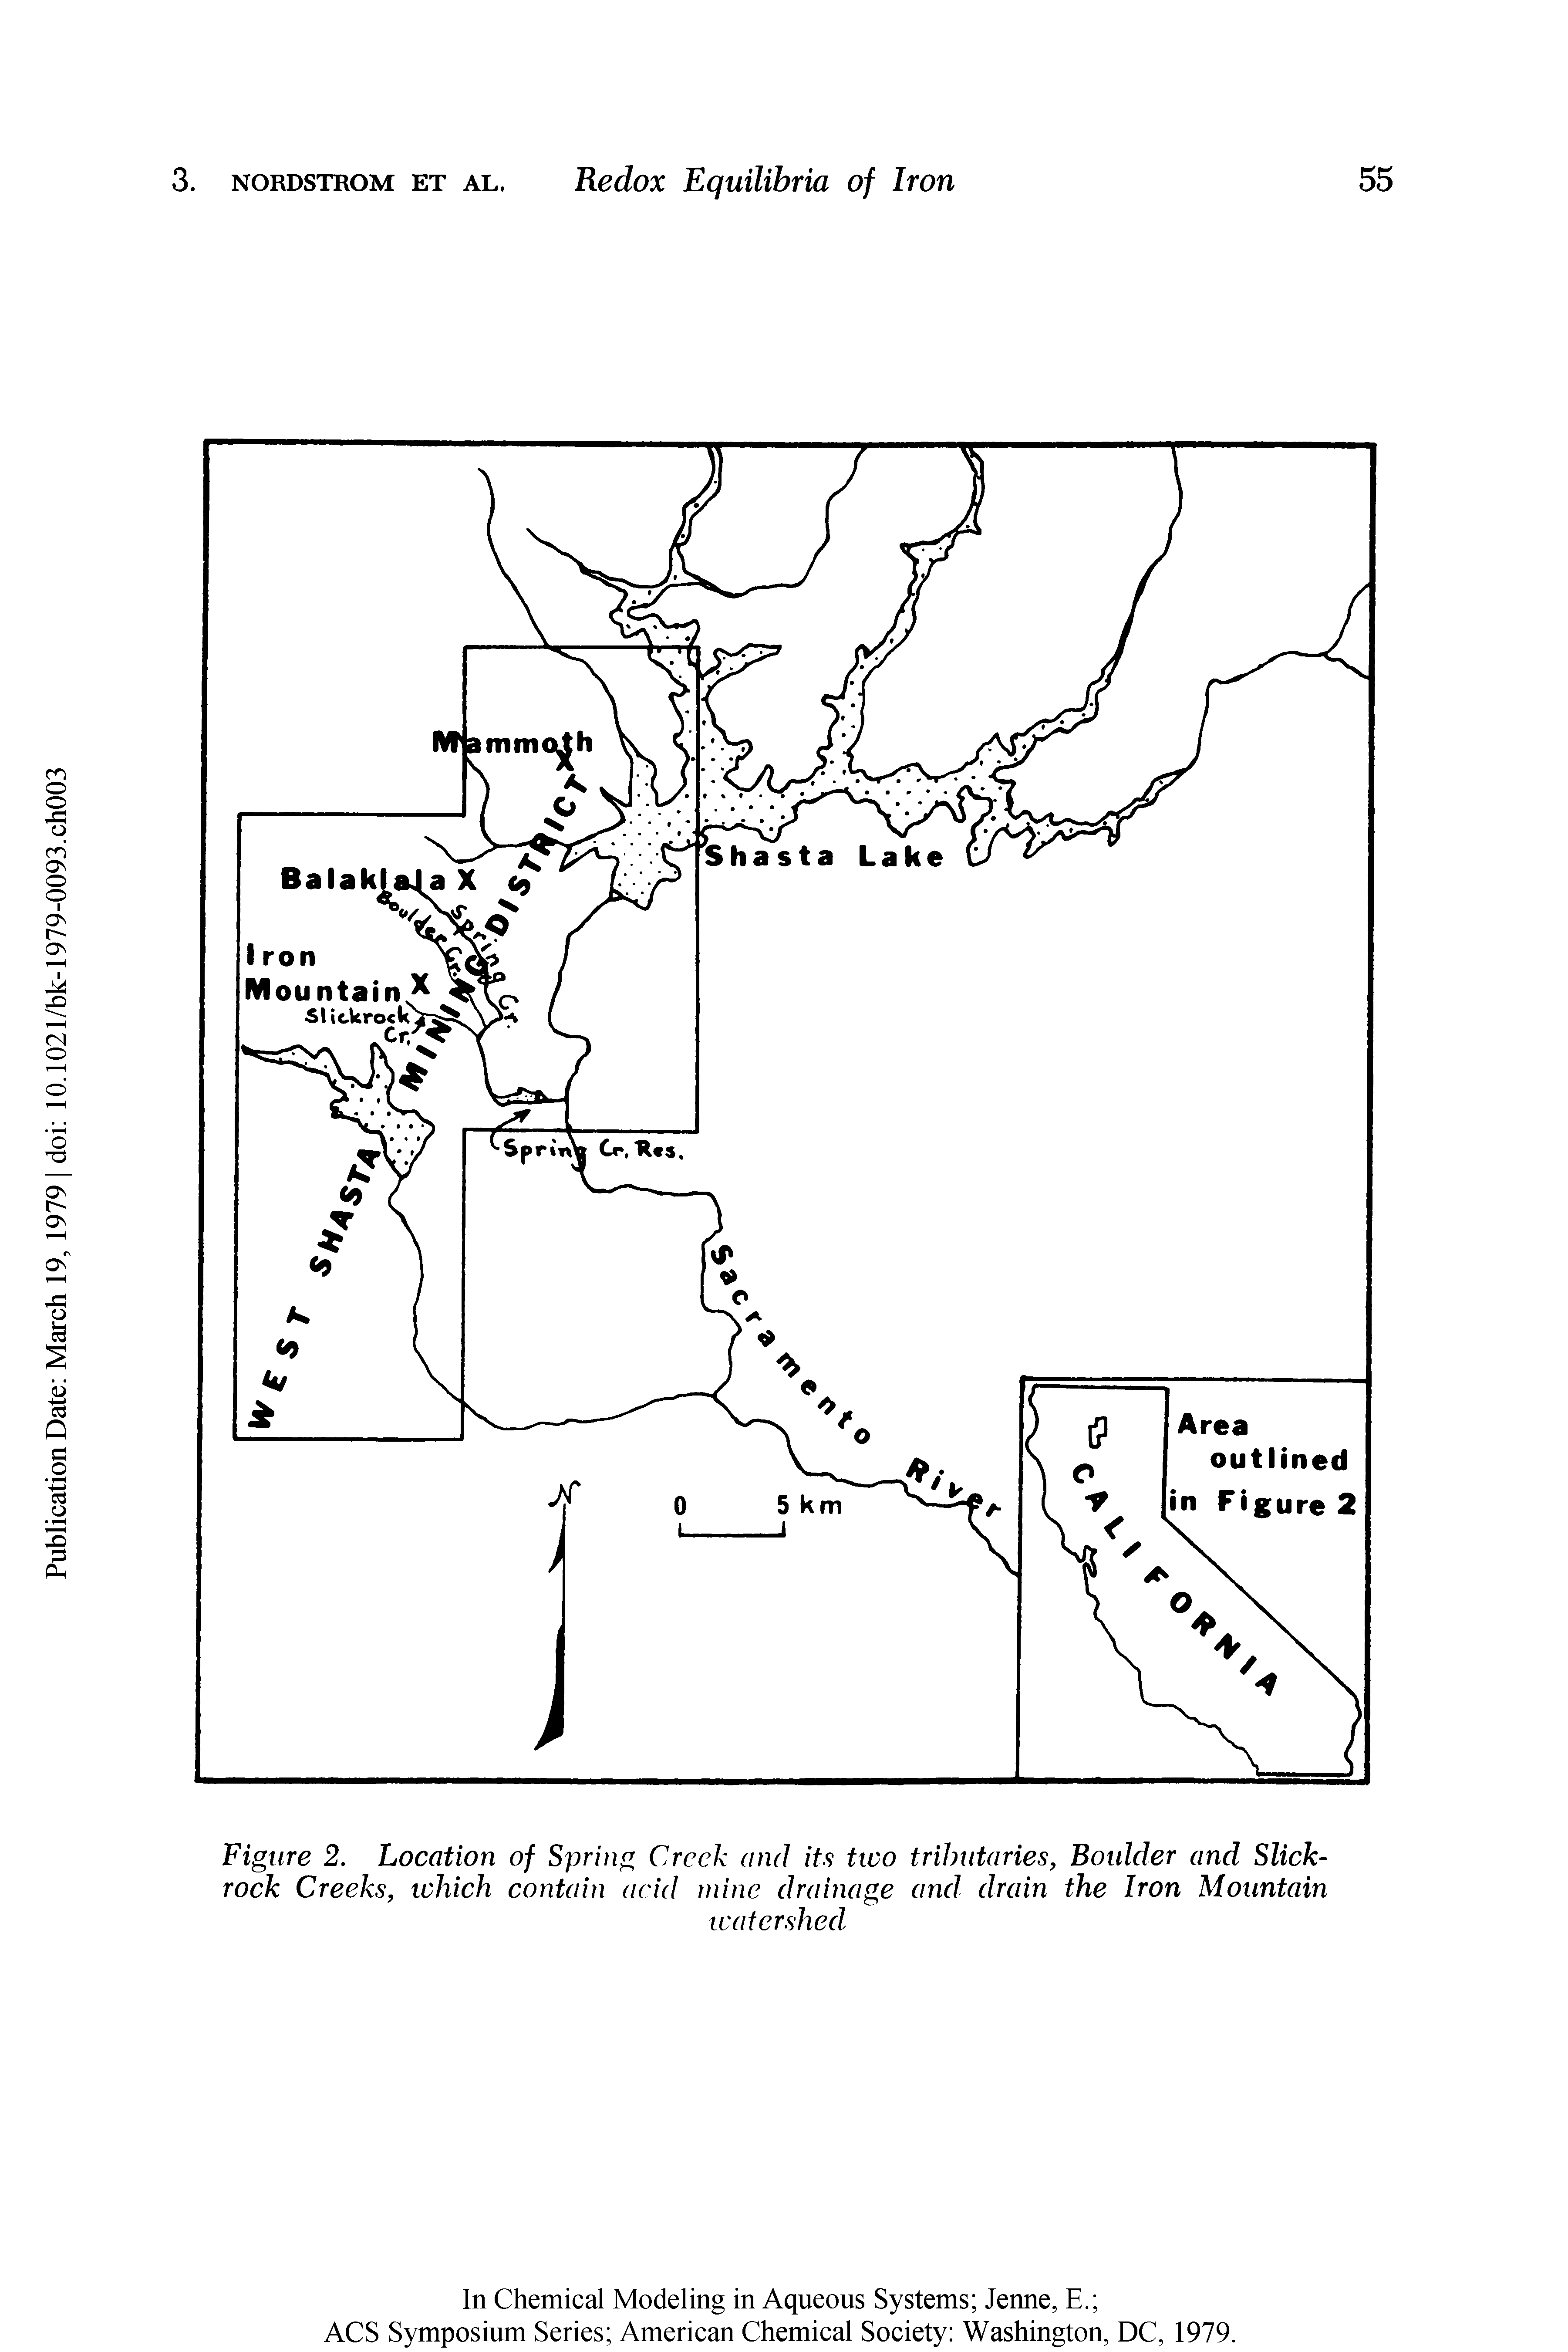 Figure 2. Location of Spring Creek and its two tributaries, Boulder and Slick-rock Creeks, which contain acid mine drainage and drain the Iron Mountain...